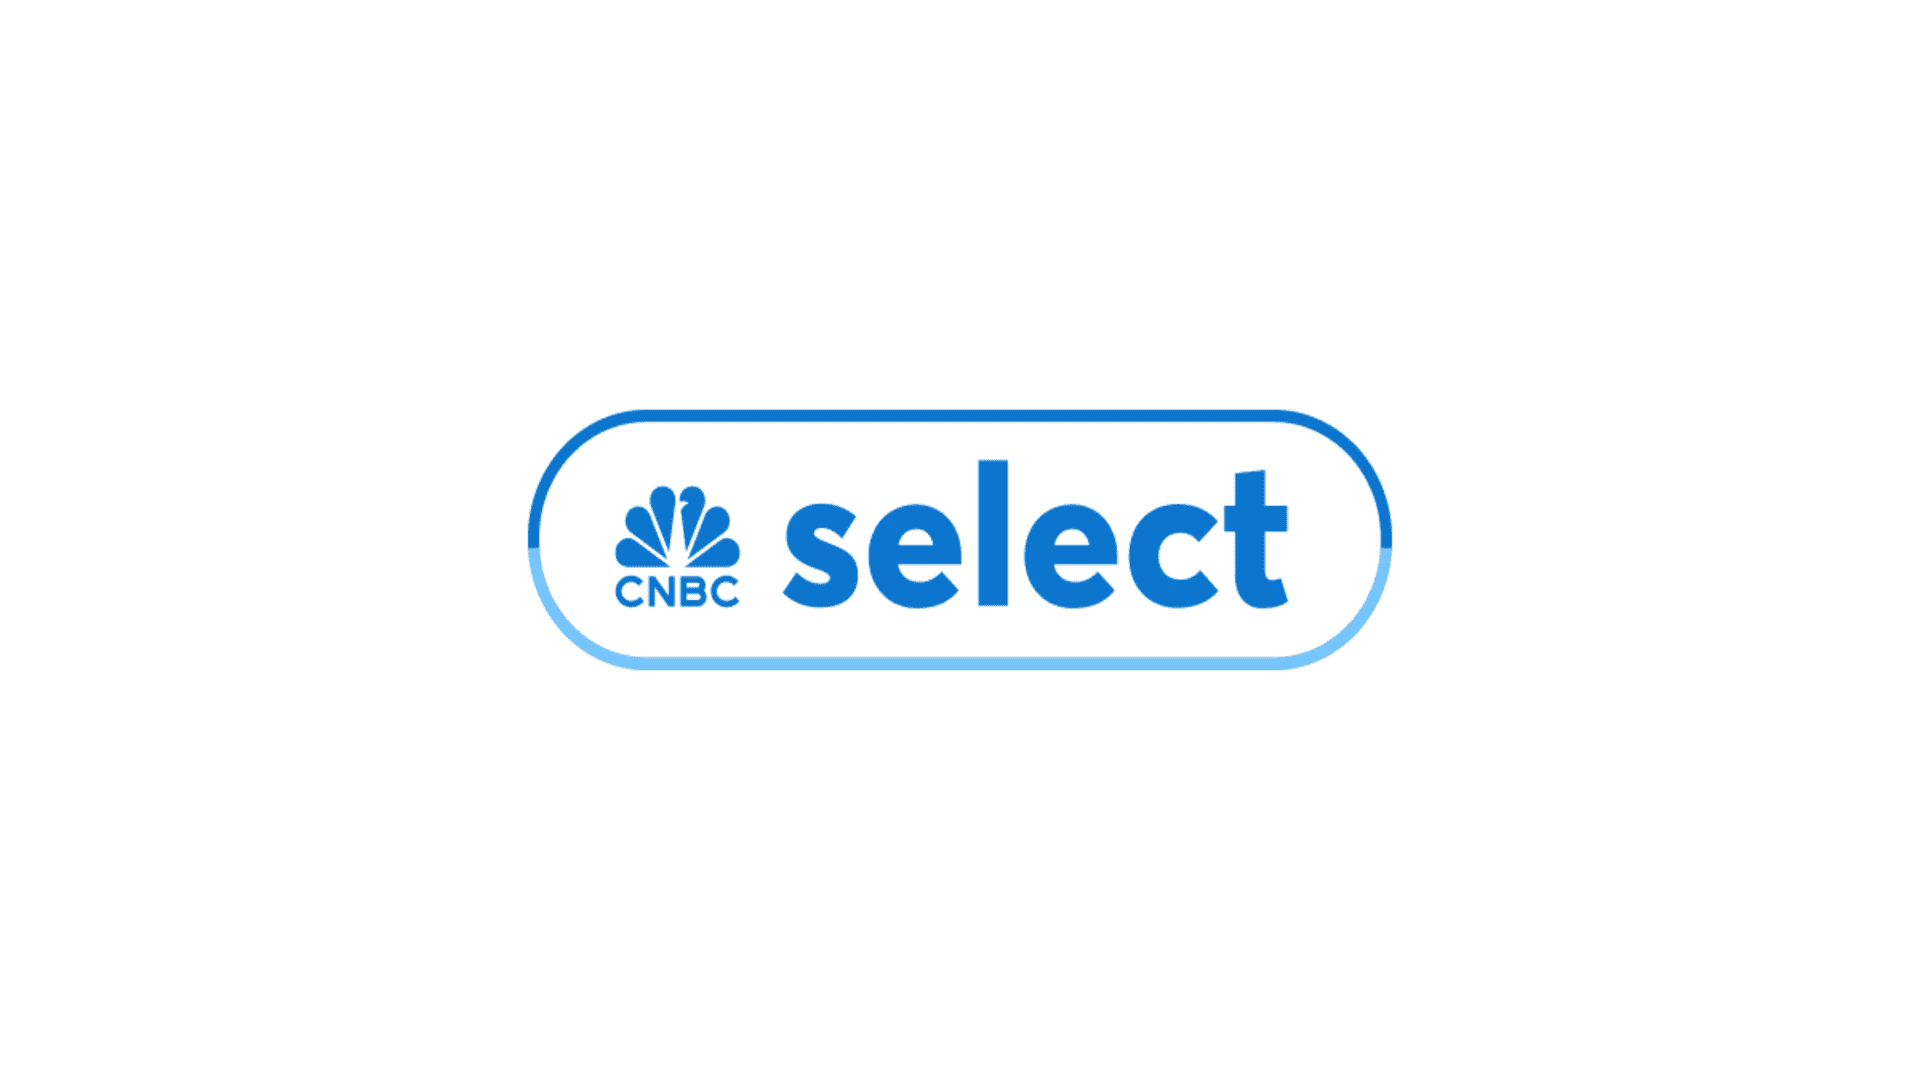 Advice Financial | Select Expert CNBC and Information